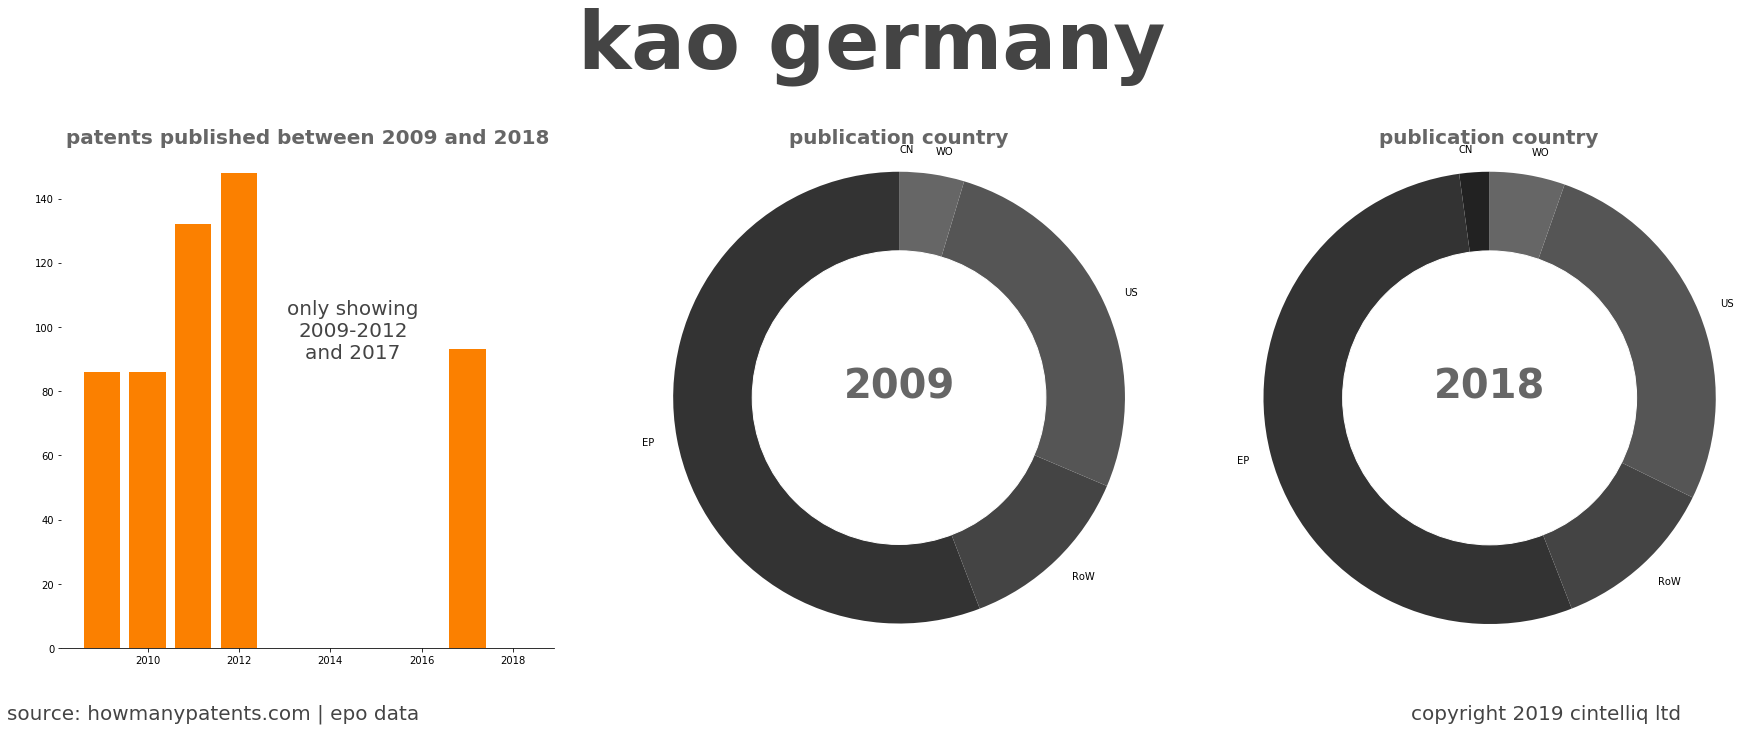 summary of patents for Kao Germany